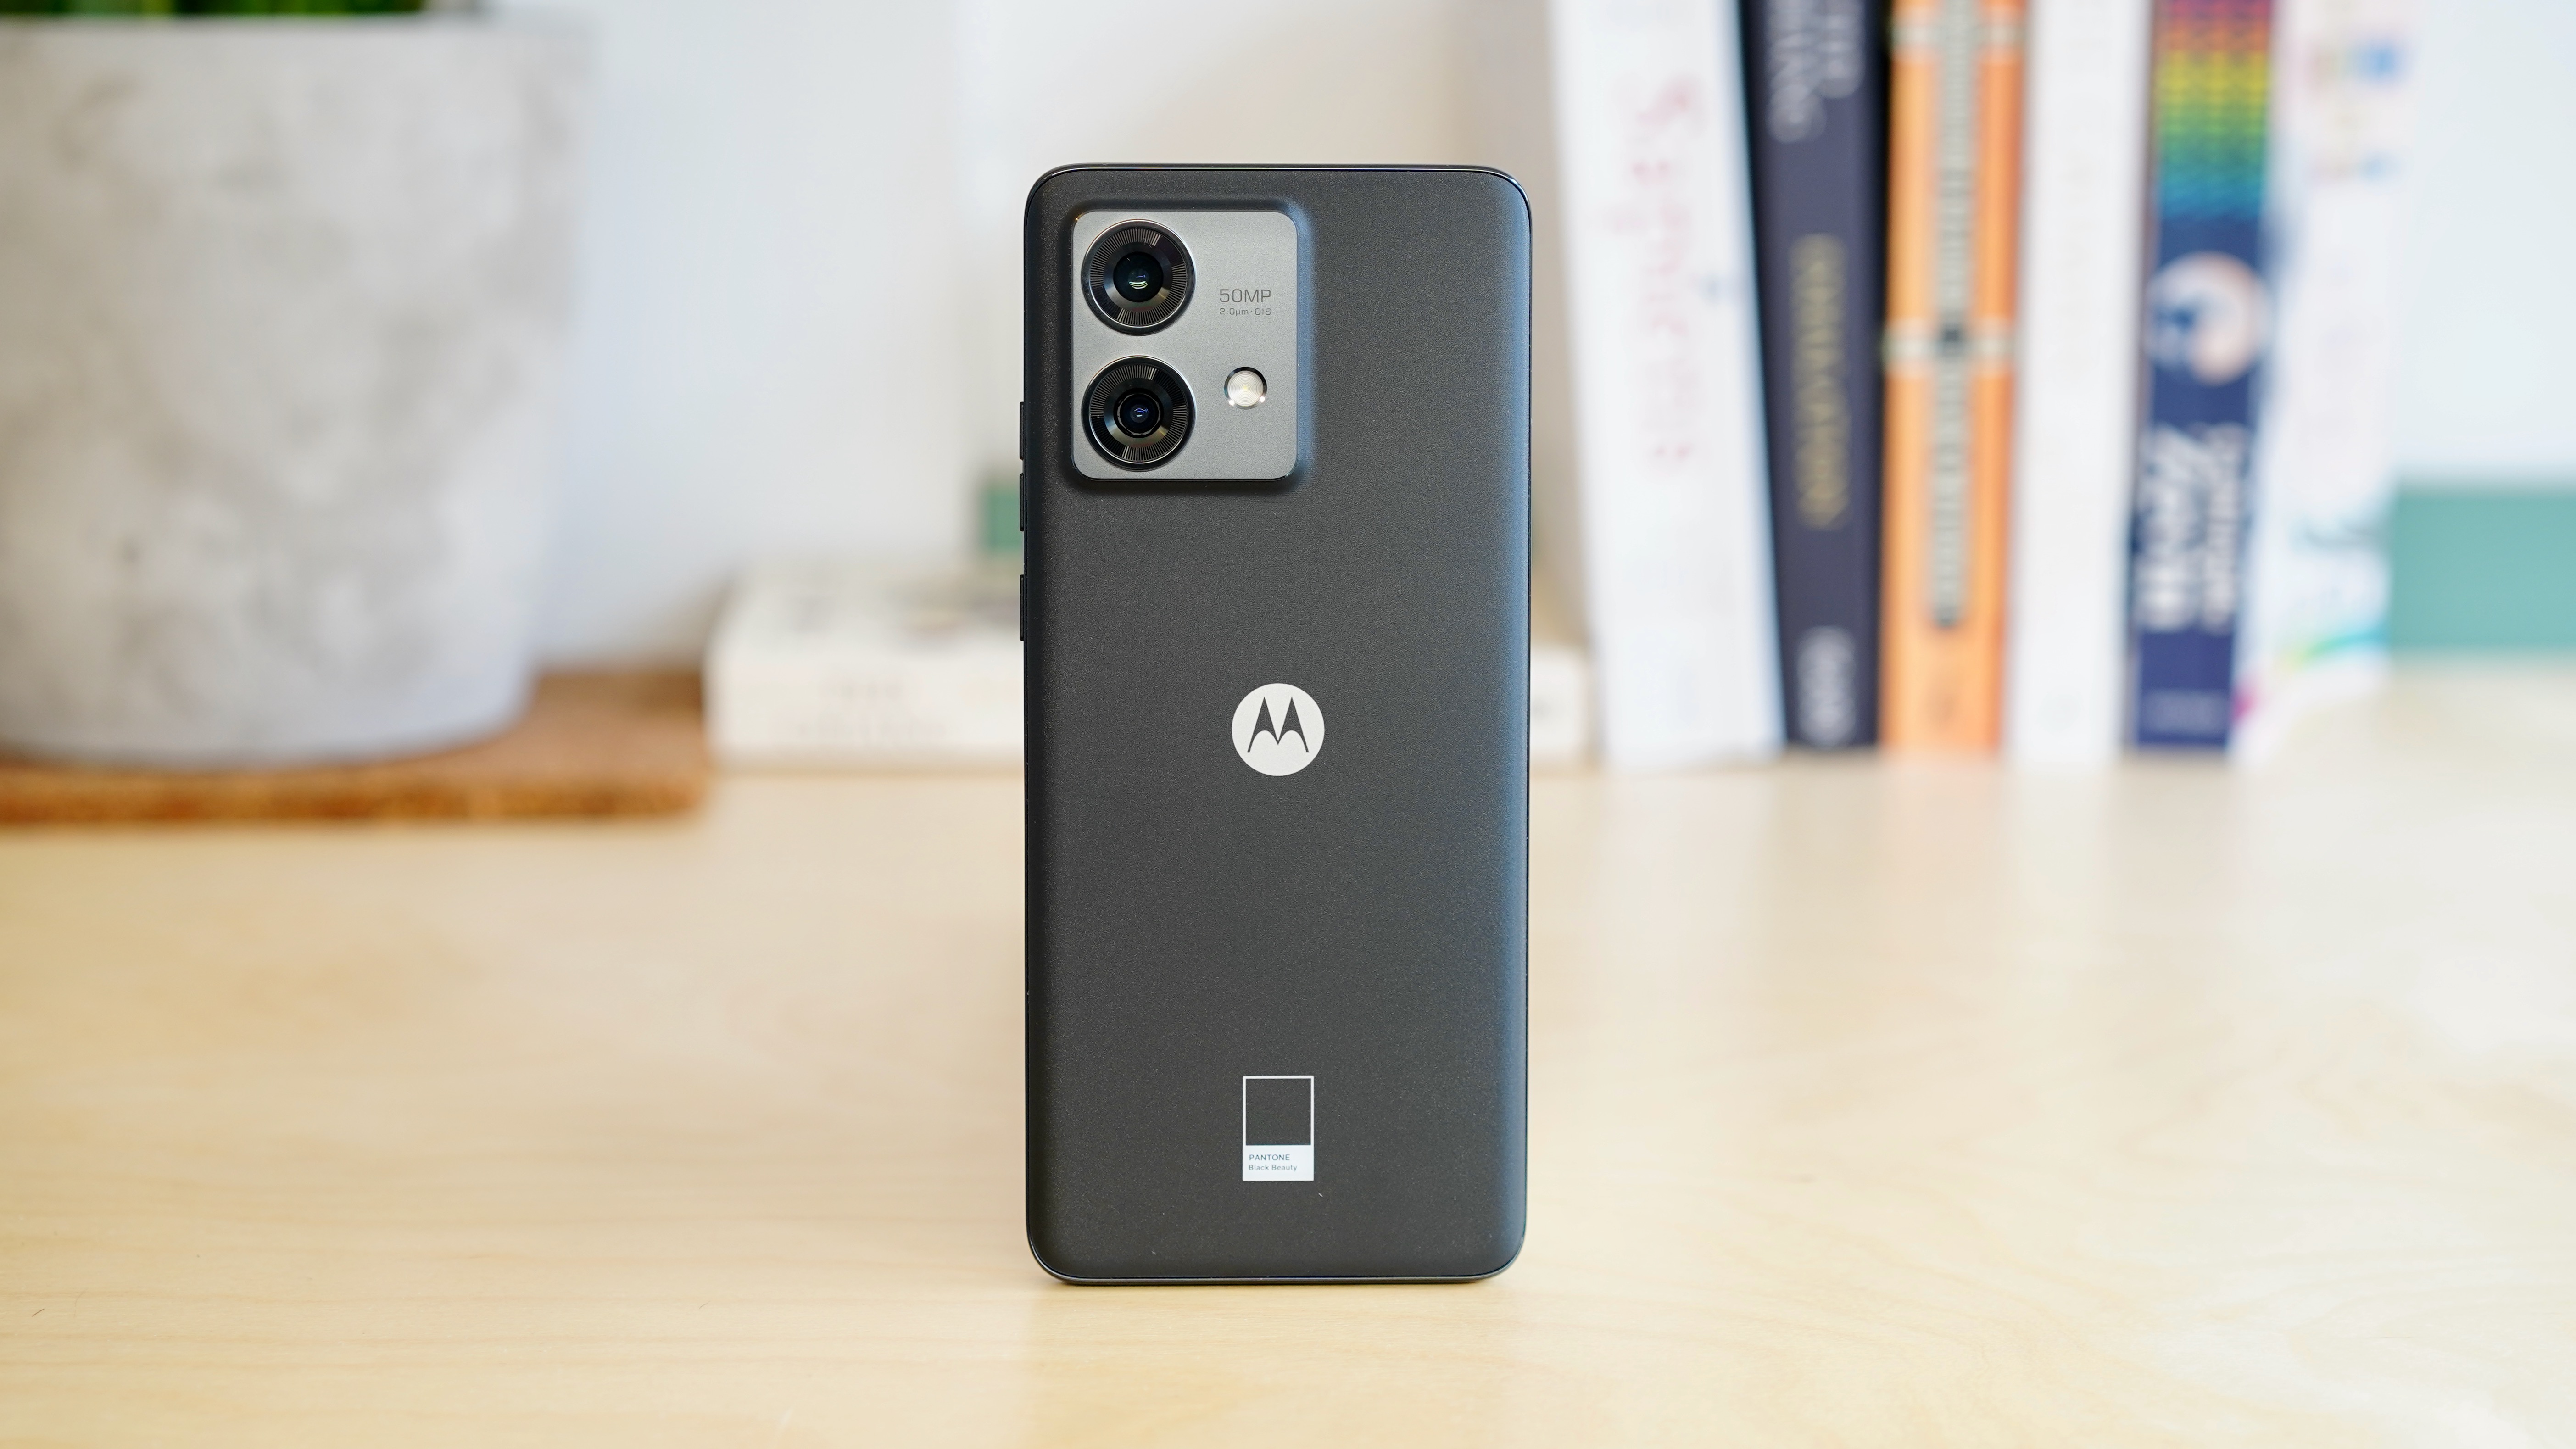 Best Android Camera Phone, moto g23